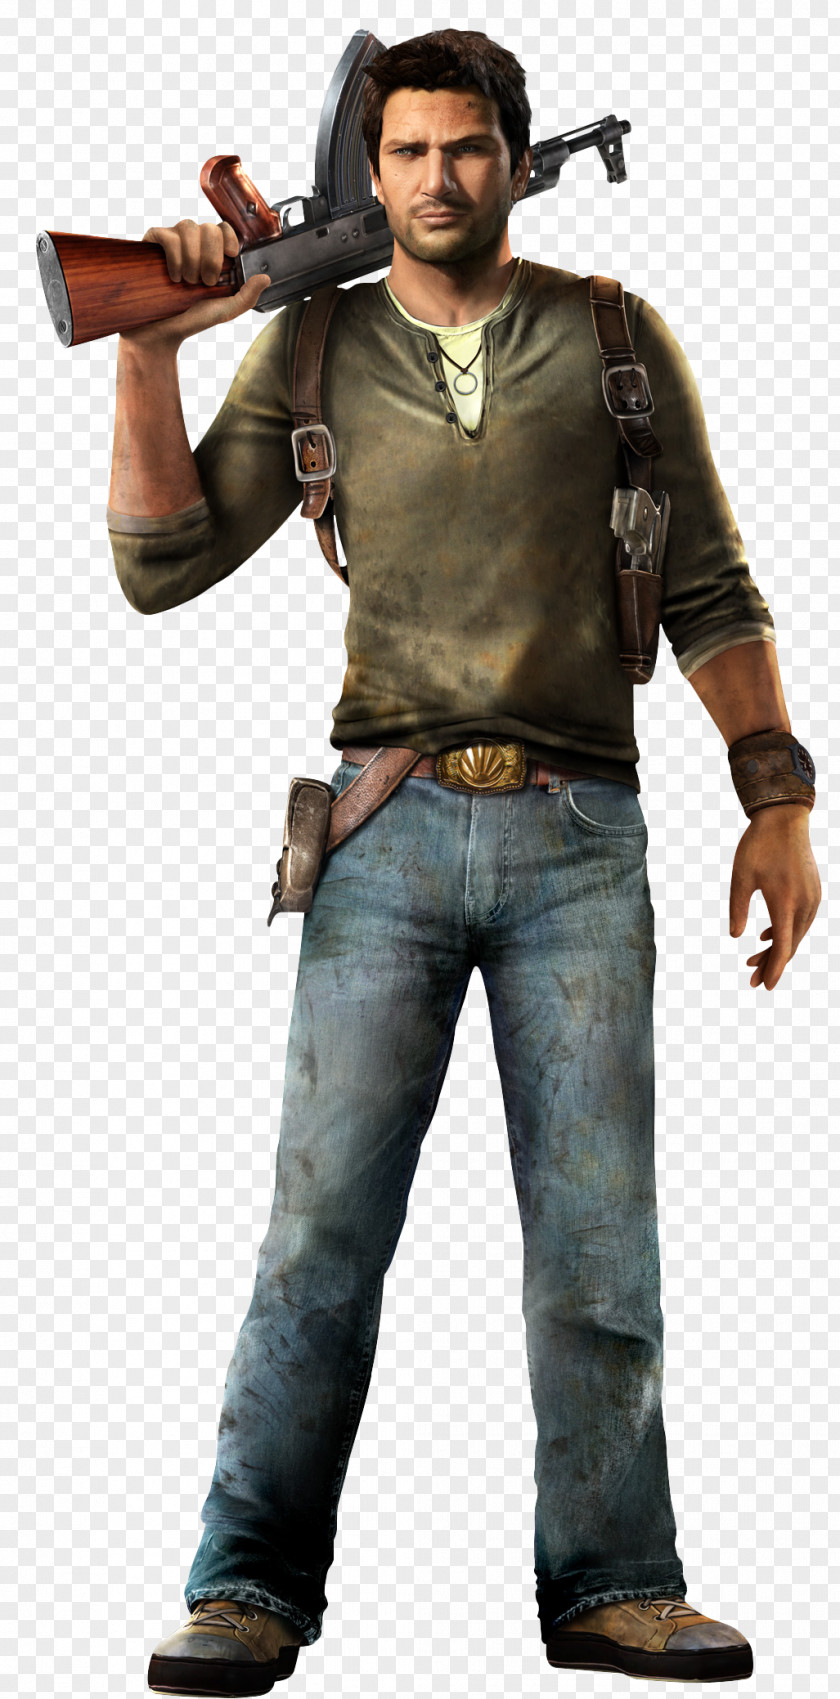 Drake PlayStation All-Stars Battle Royale Uncharted: Drake's Fortune 3 Nathan 2 PNG